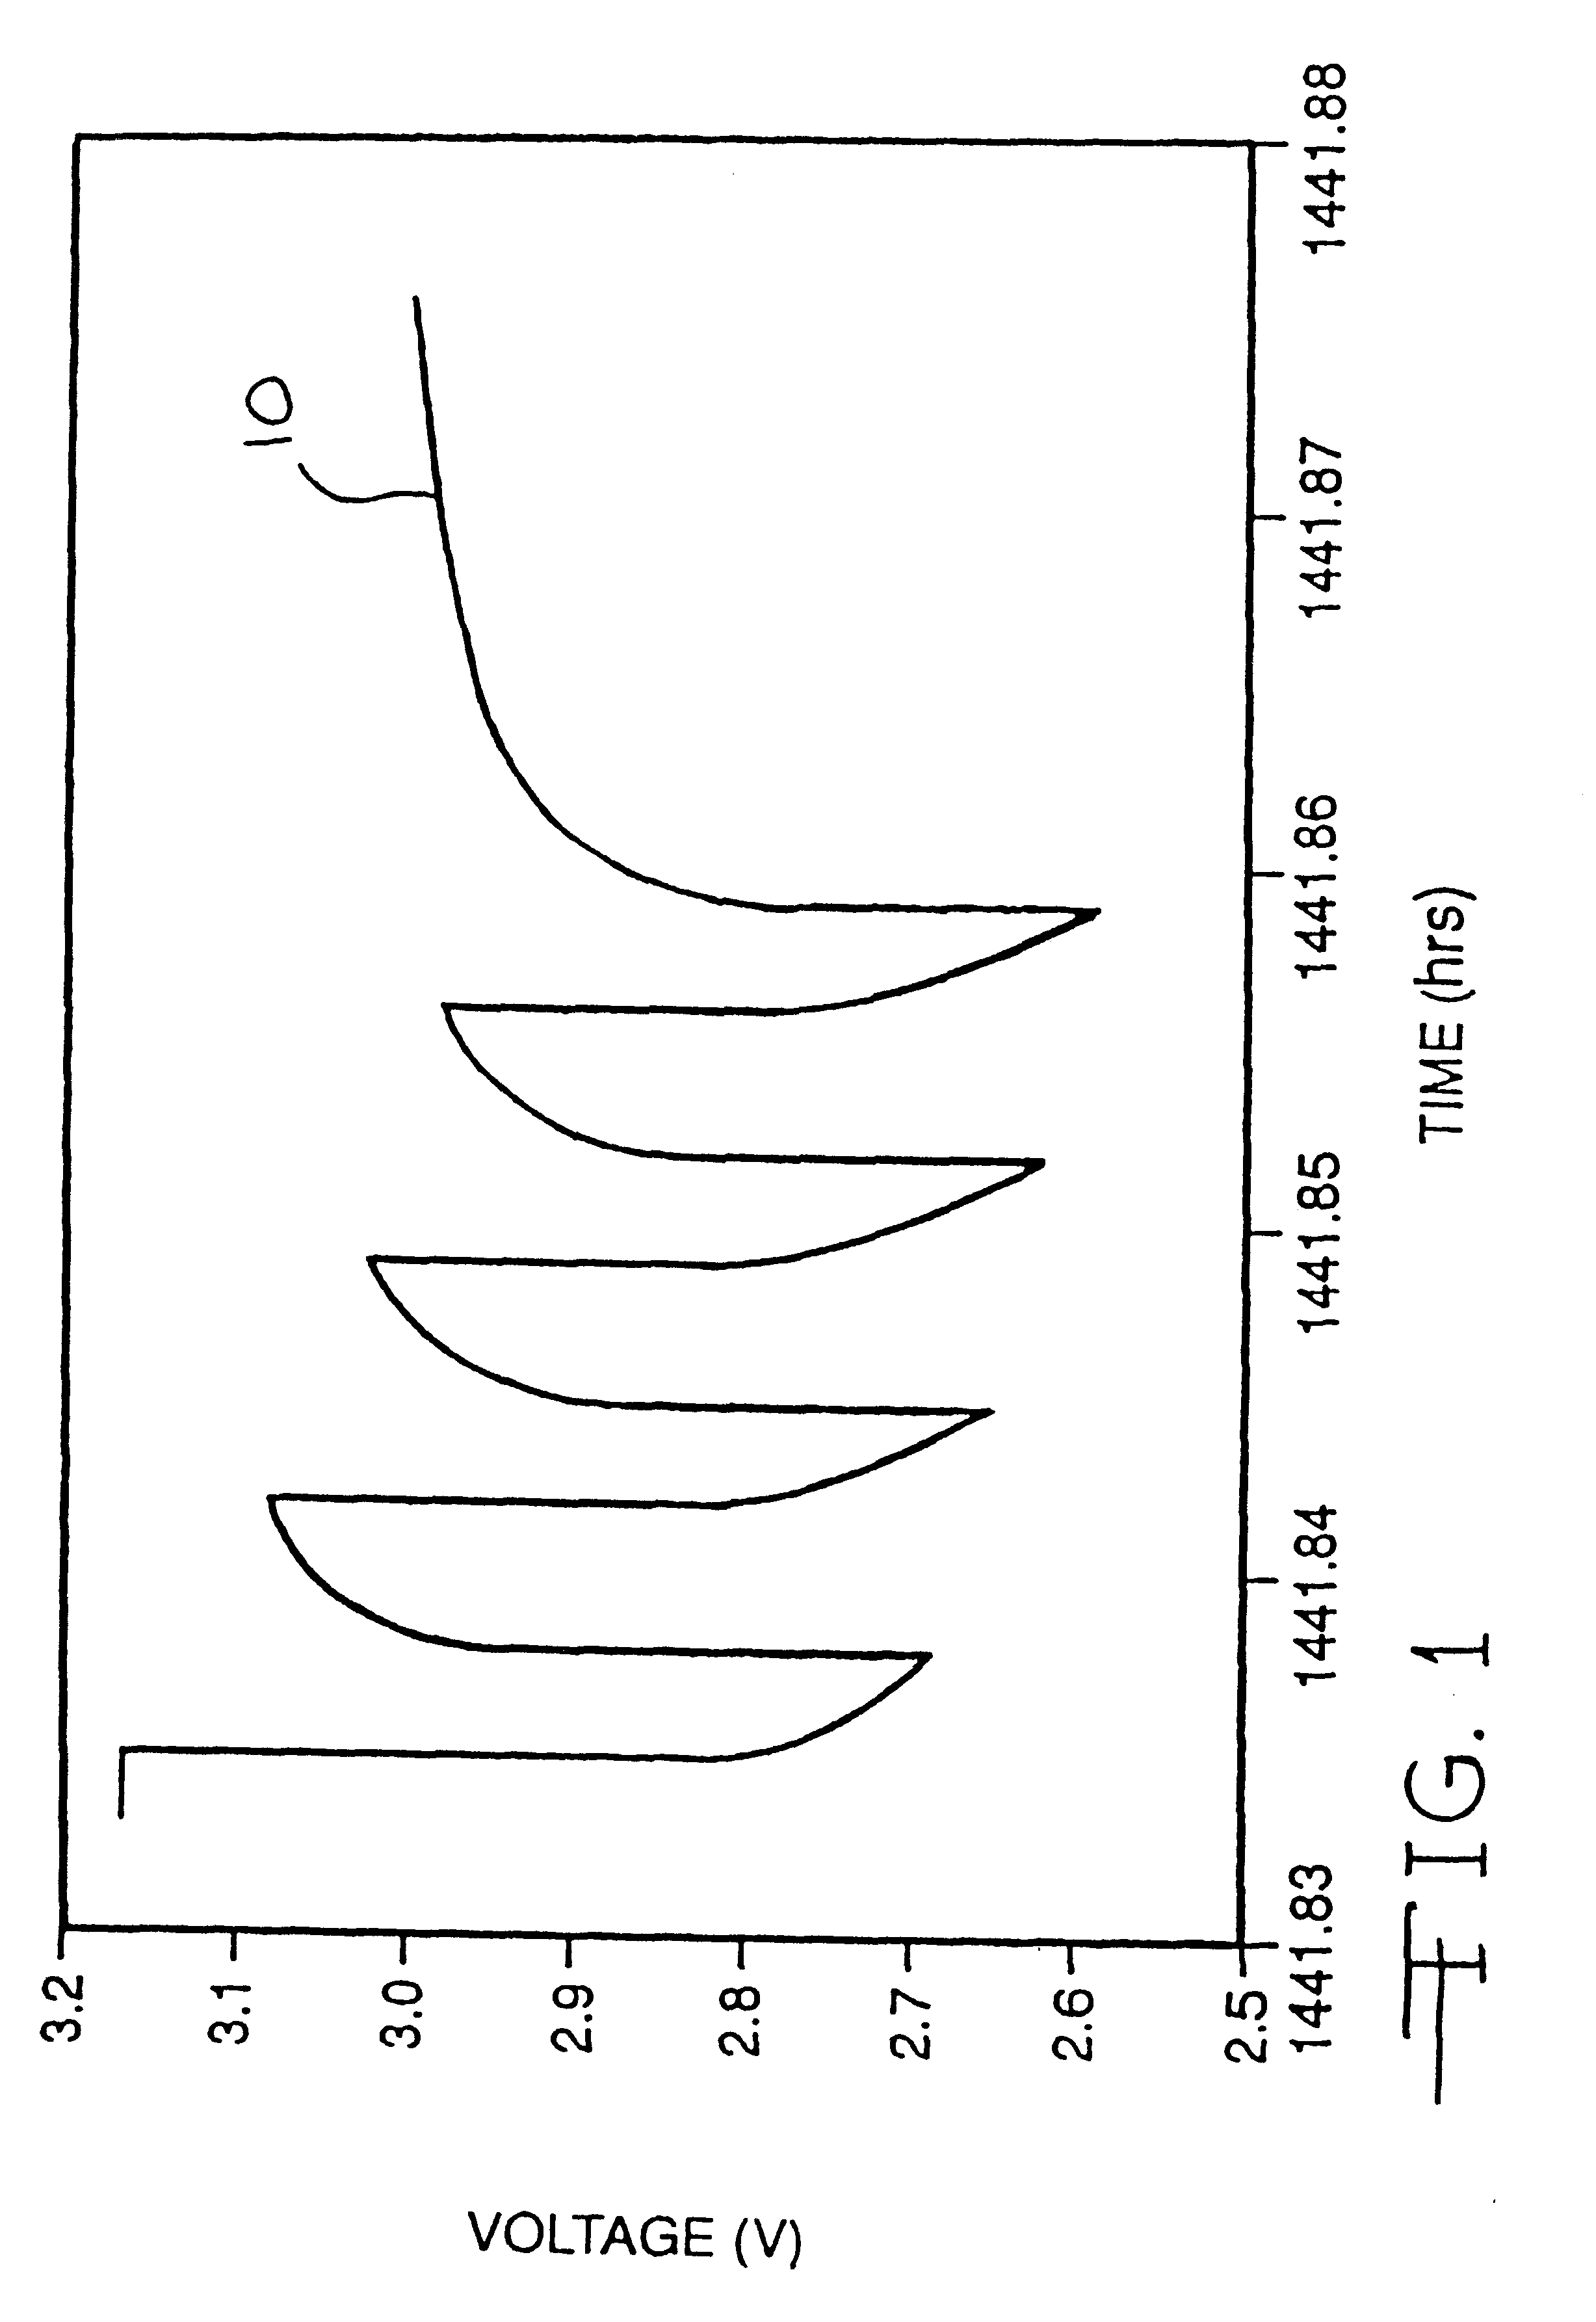 Alkali metal electrochemical cell activated with a nonaqueous electrolyte having a sulfate additive